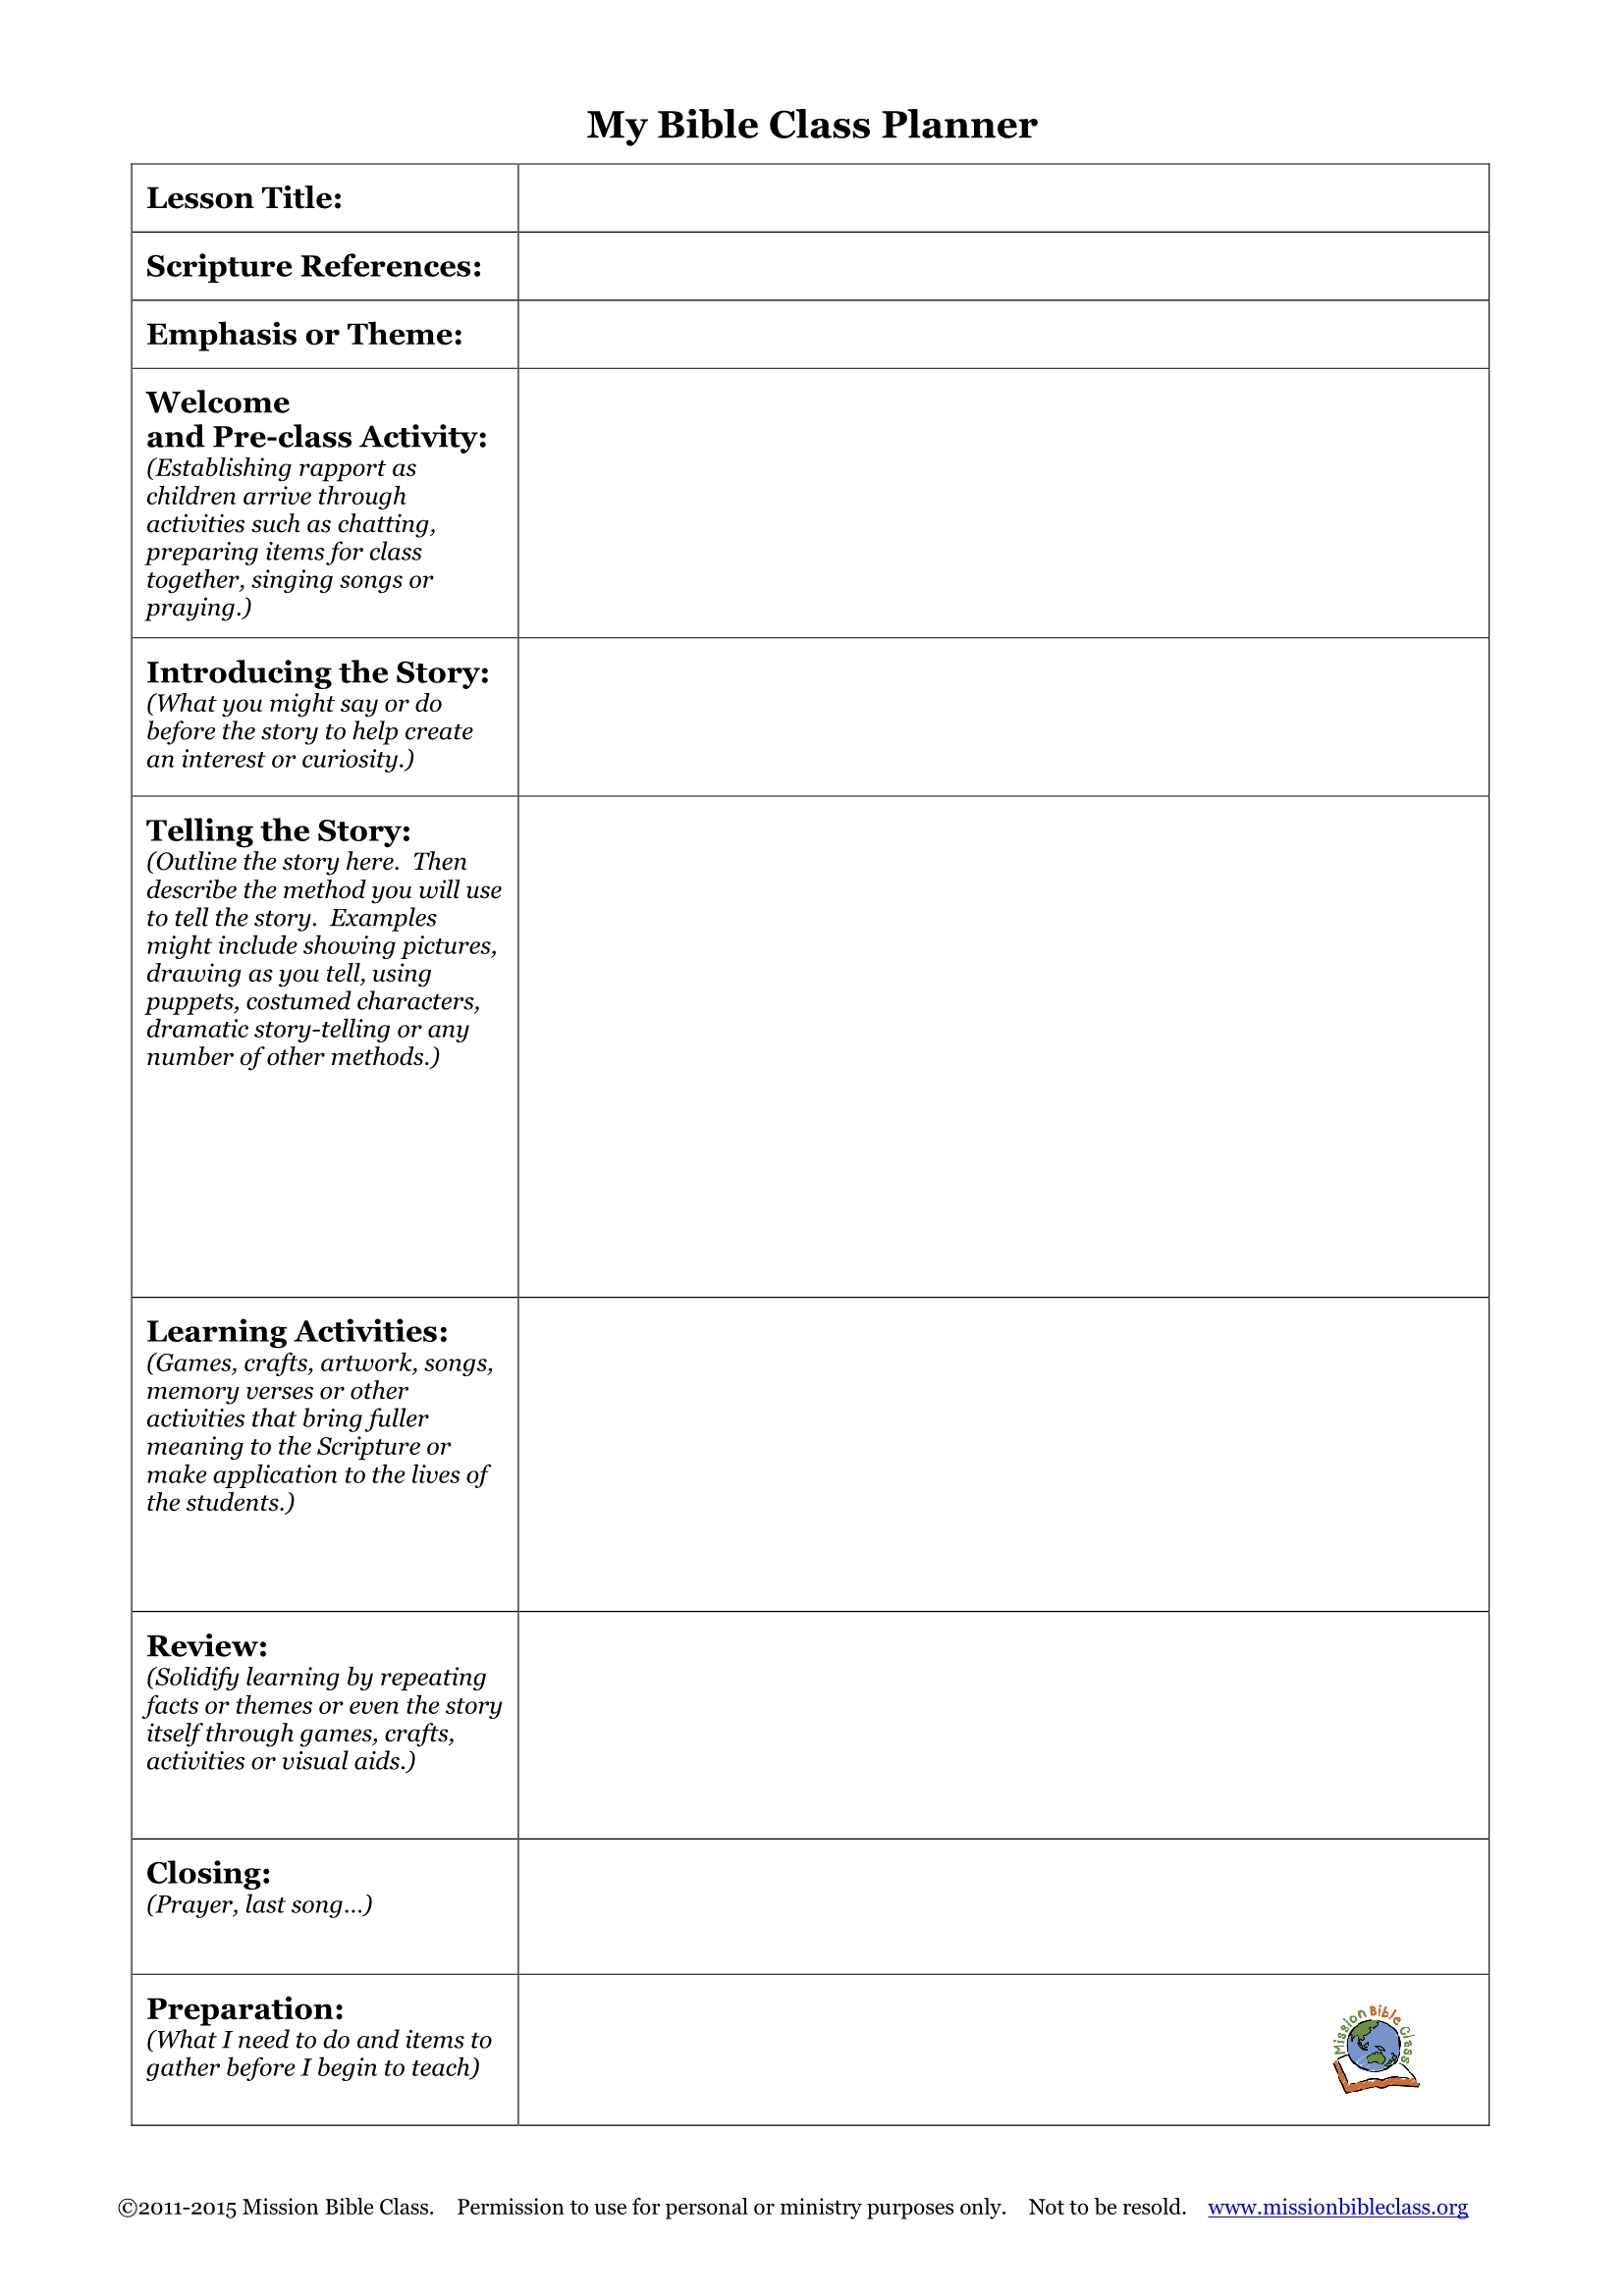 Blank Lesson Plan Templates To Print | Teaching The Bible To with Template Printable For Monthly Calendar Lesson Plans For Childrens Church